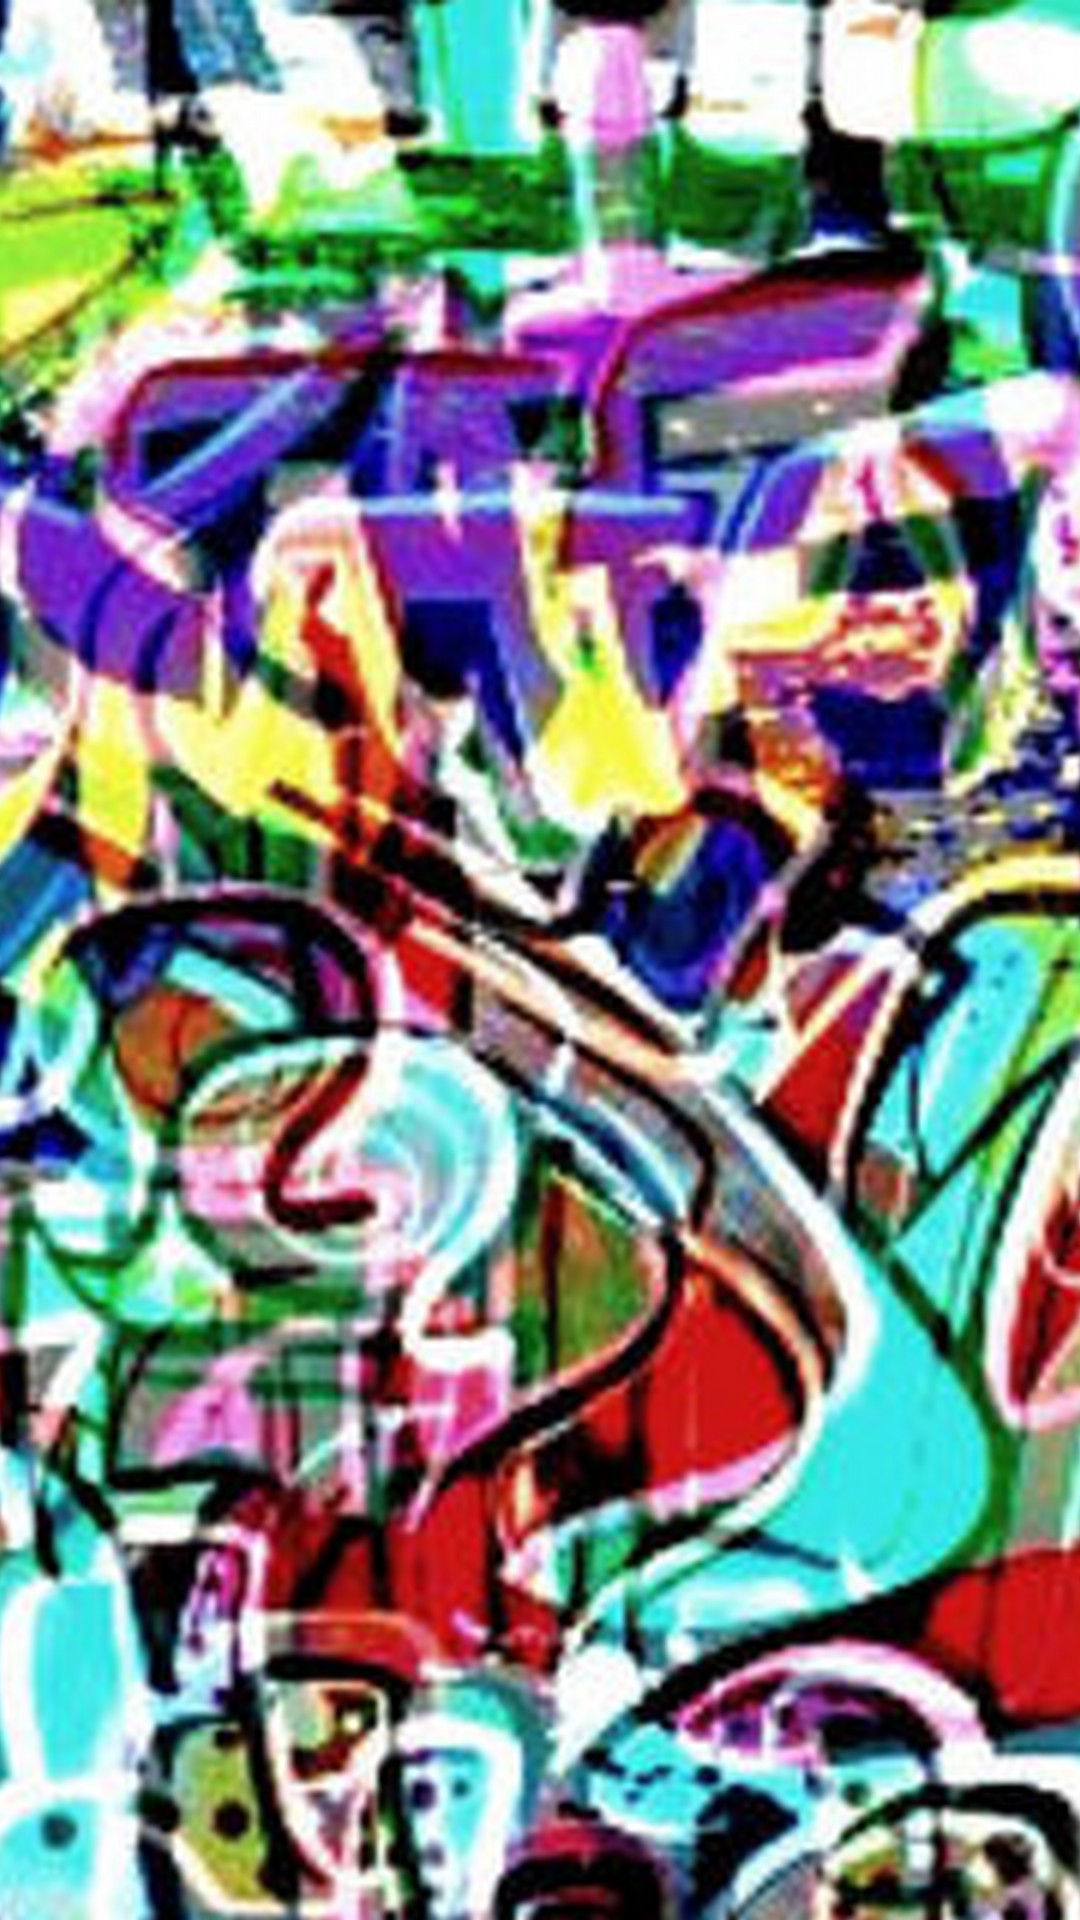 Graffiti Wallpaper For Android with image resolution 1080x1920 pixel. You can make this wallpaper for your Android backgrounds, Tablet, Smartphones Screensavers and Mobile Phone Lock Screen